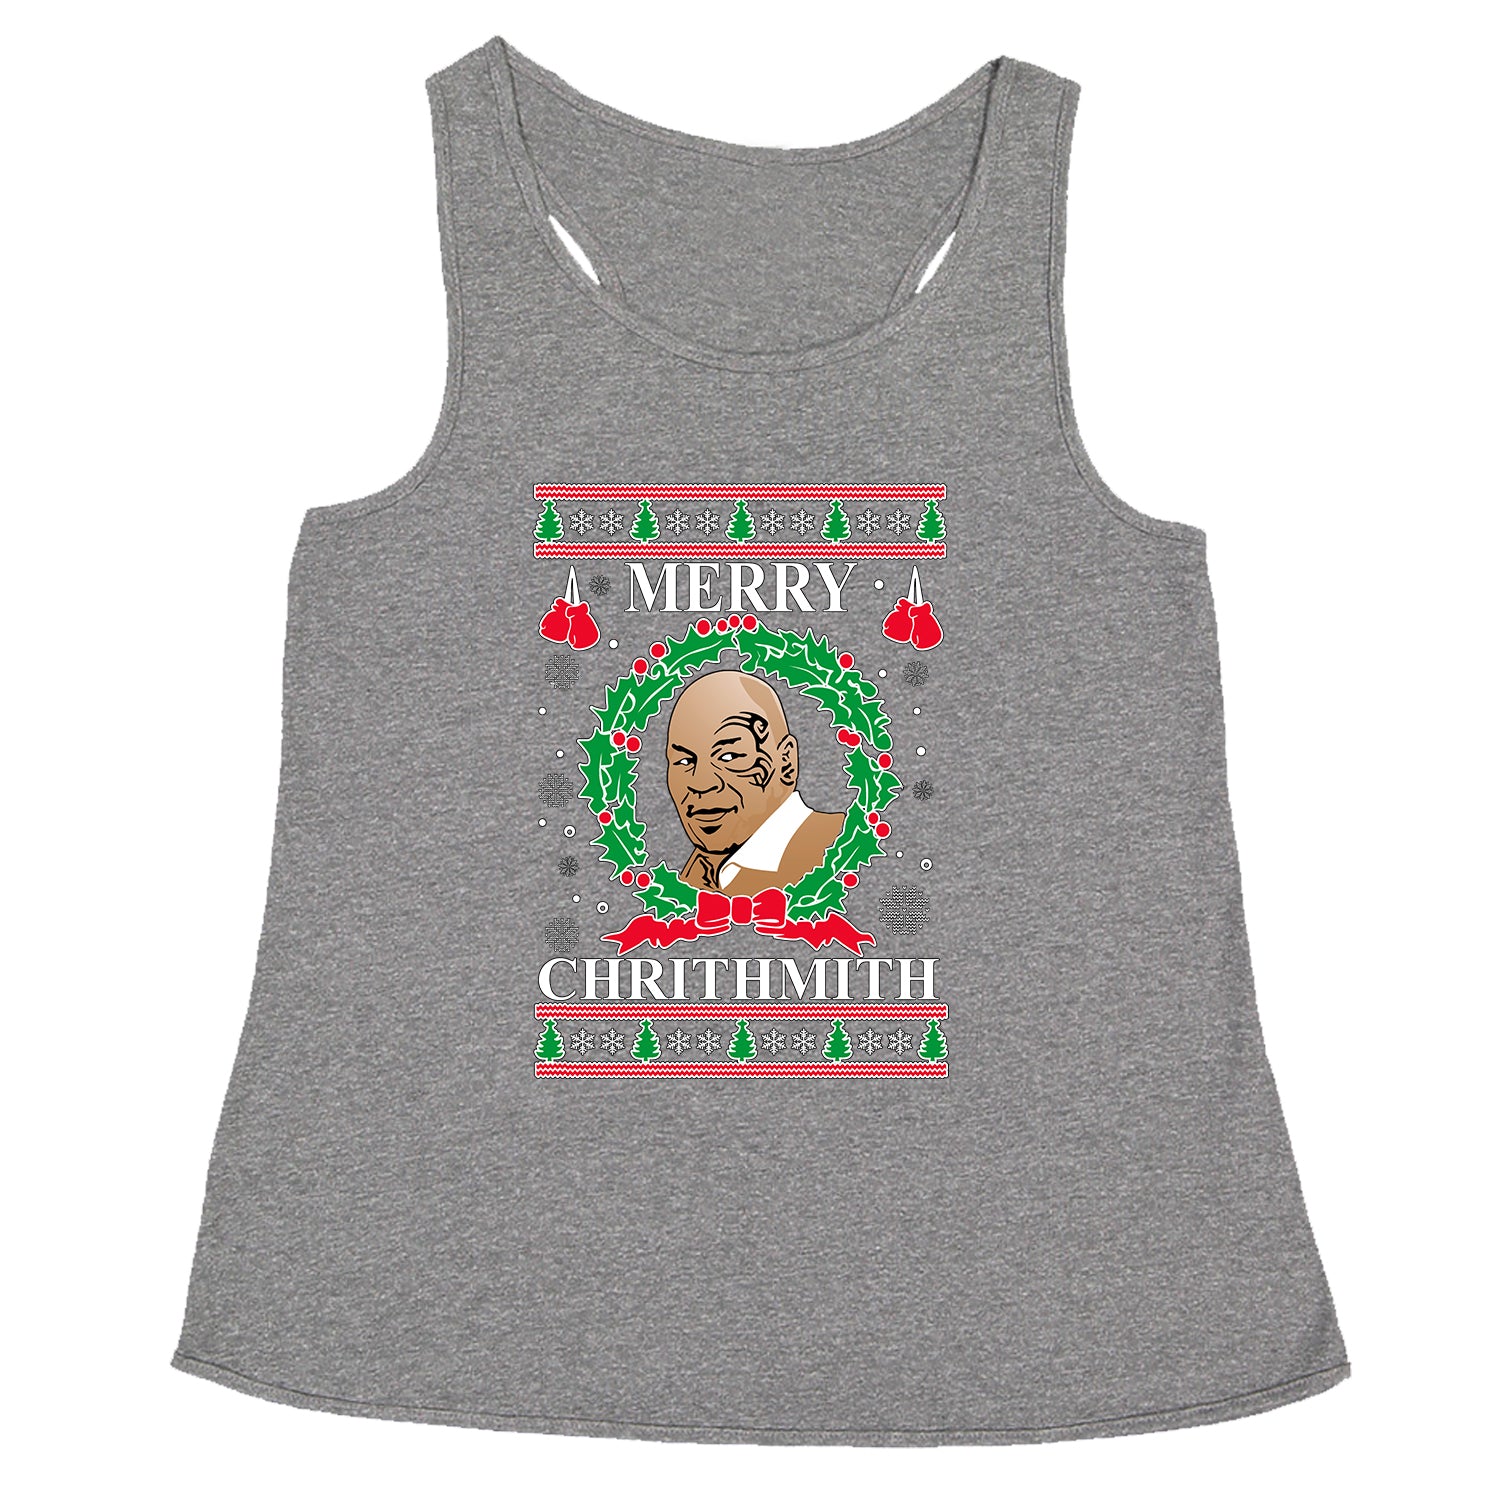 Merry Chrithmith Ugly Christmas Racerback Tank Top for Women christmas, holiday, michael, mike, sweater, tyson, ugly by Expression Tees